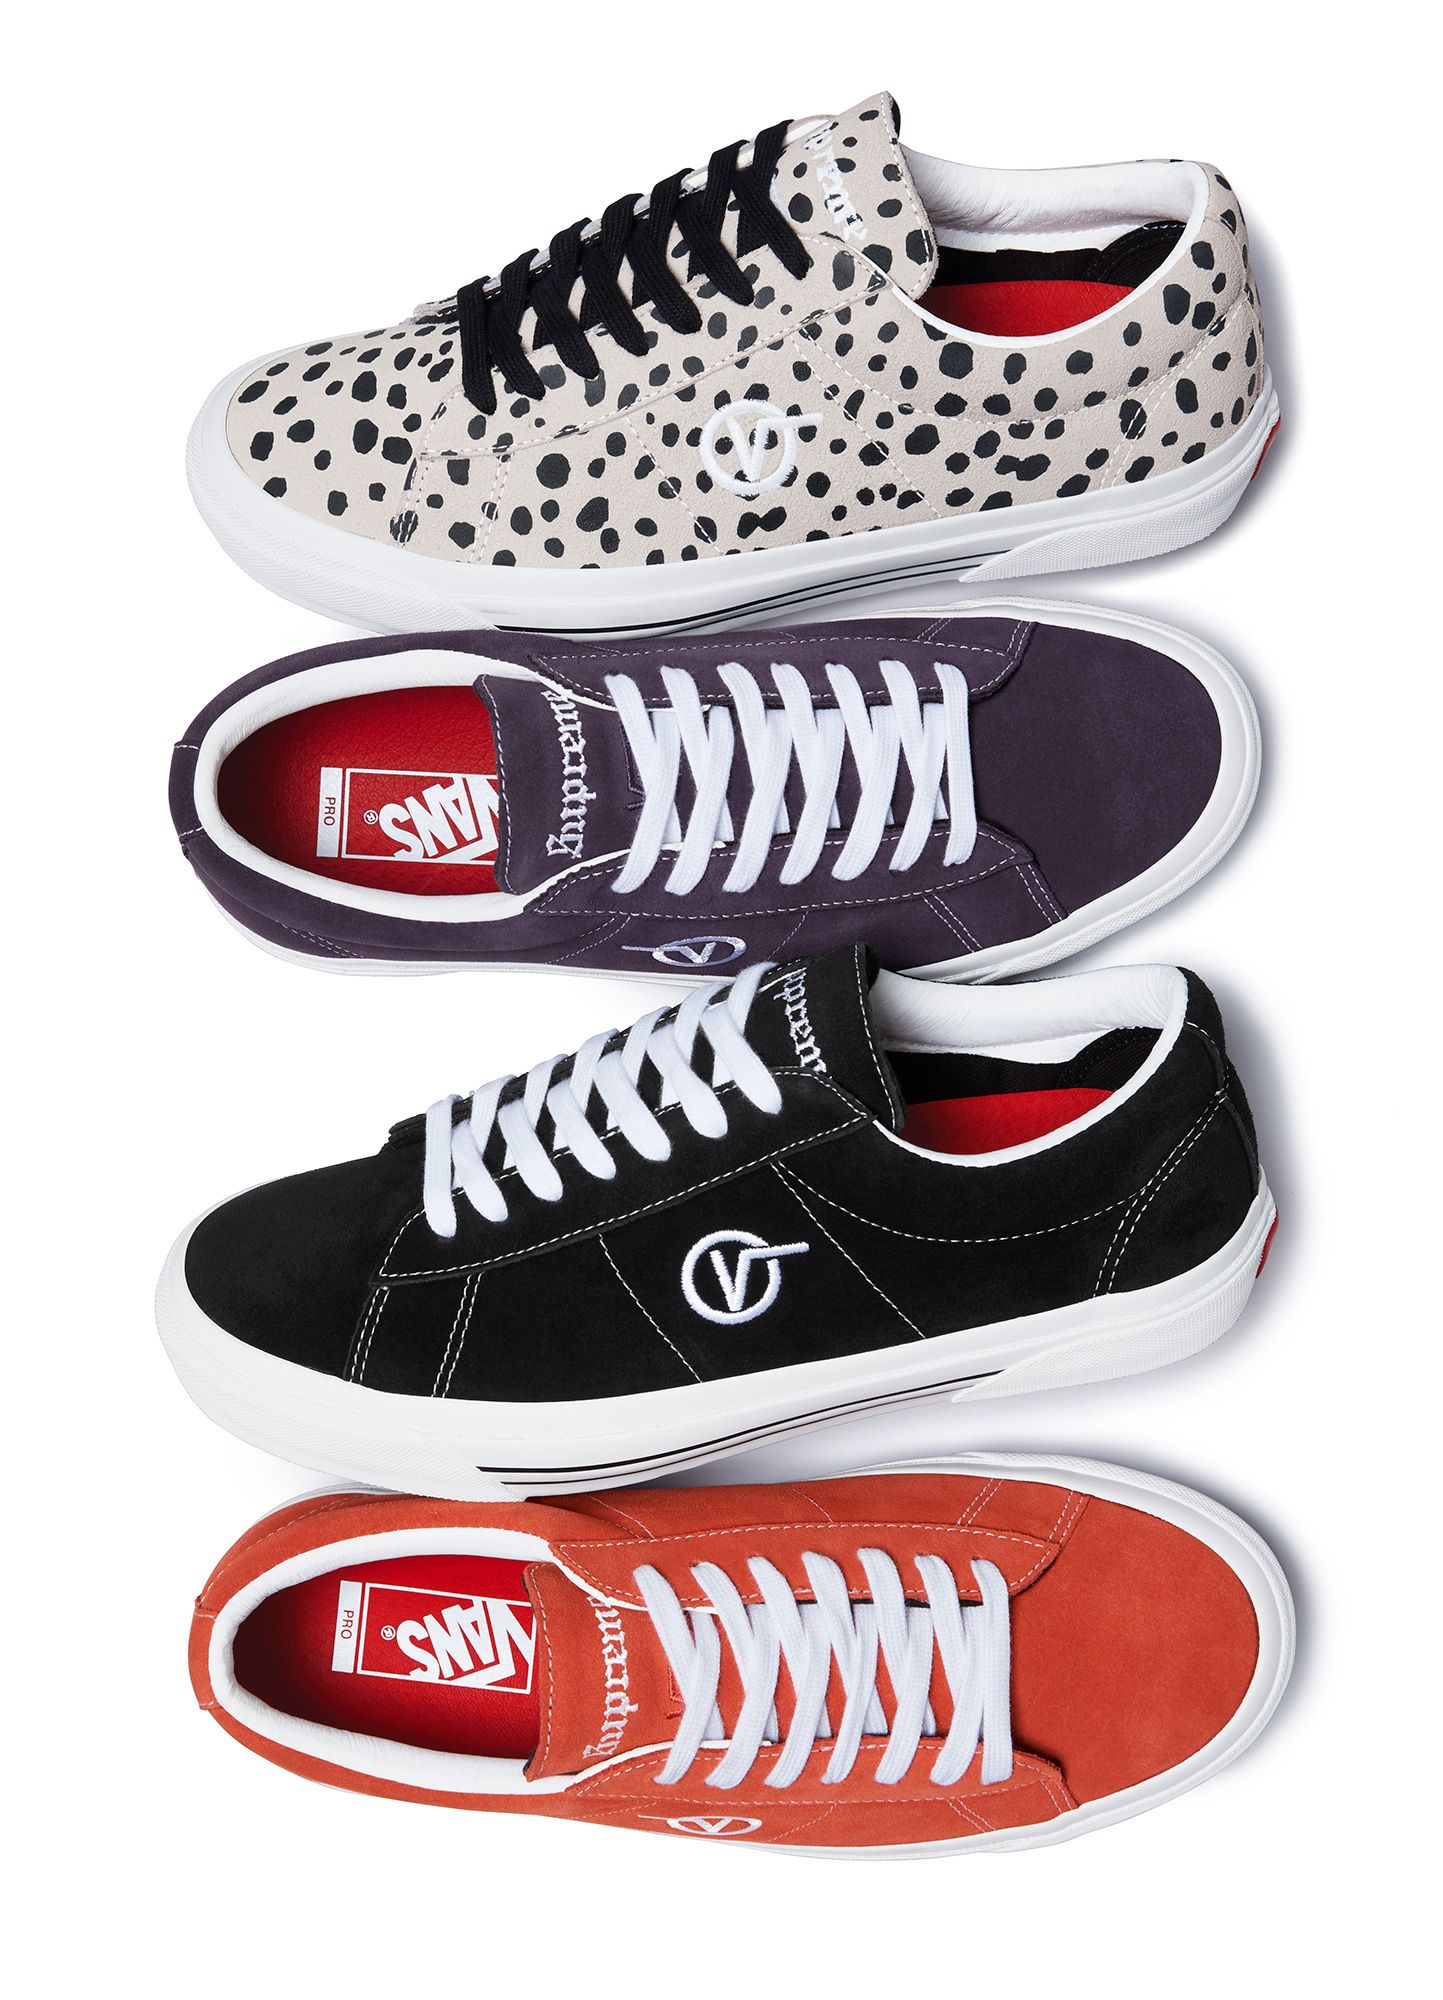 Supreme x Vans: A Full History of Collaborations